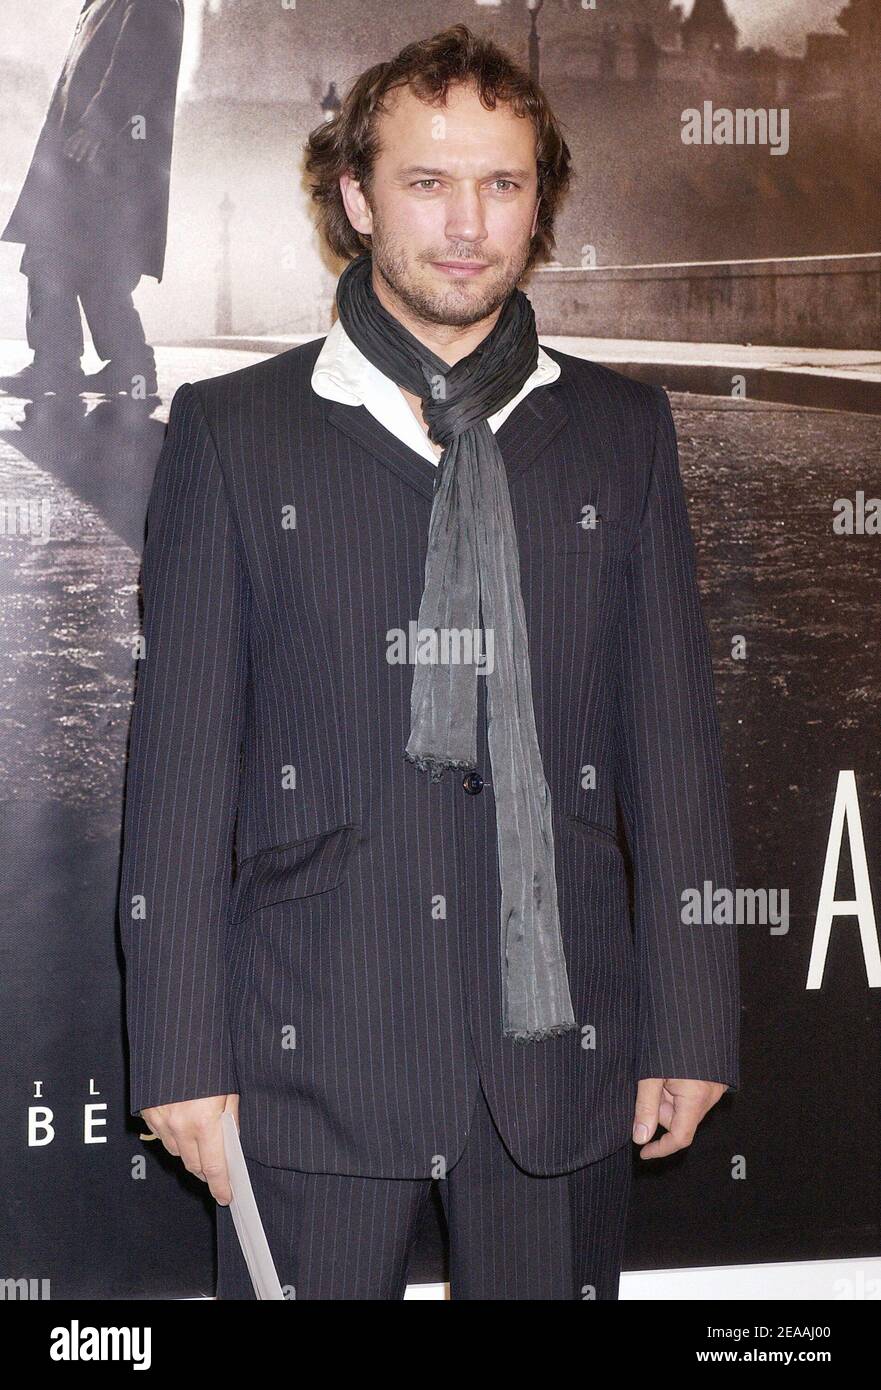 Swiss actor Vincent Perez attends the French premiere of Luc Besson's latest film, 'Angel-A', held at Gaumont Marignan theatre in Paris, France, on December 20, 2005. Photo by Bruno Klein/ABACAPRESS.COM Stock Photo